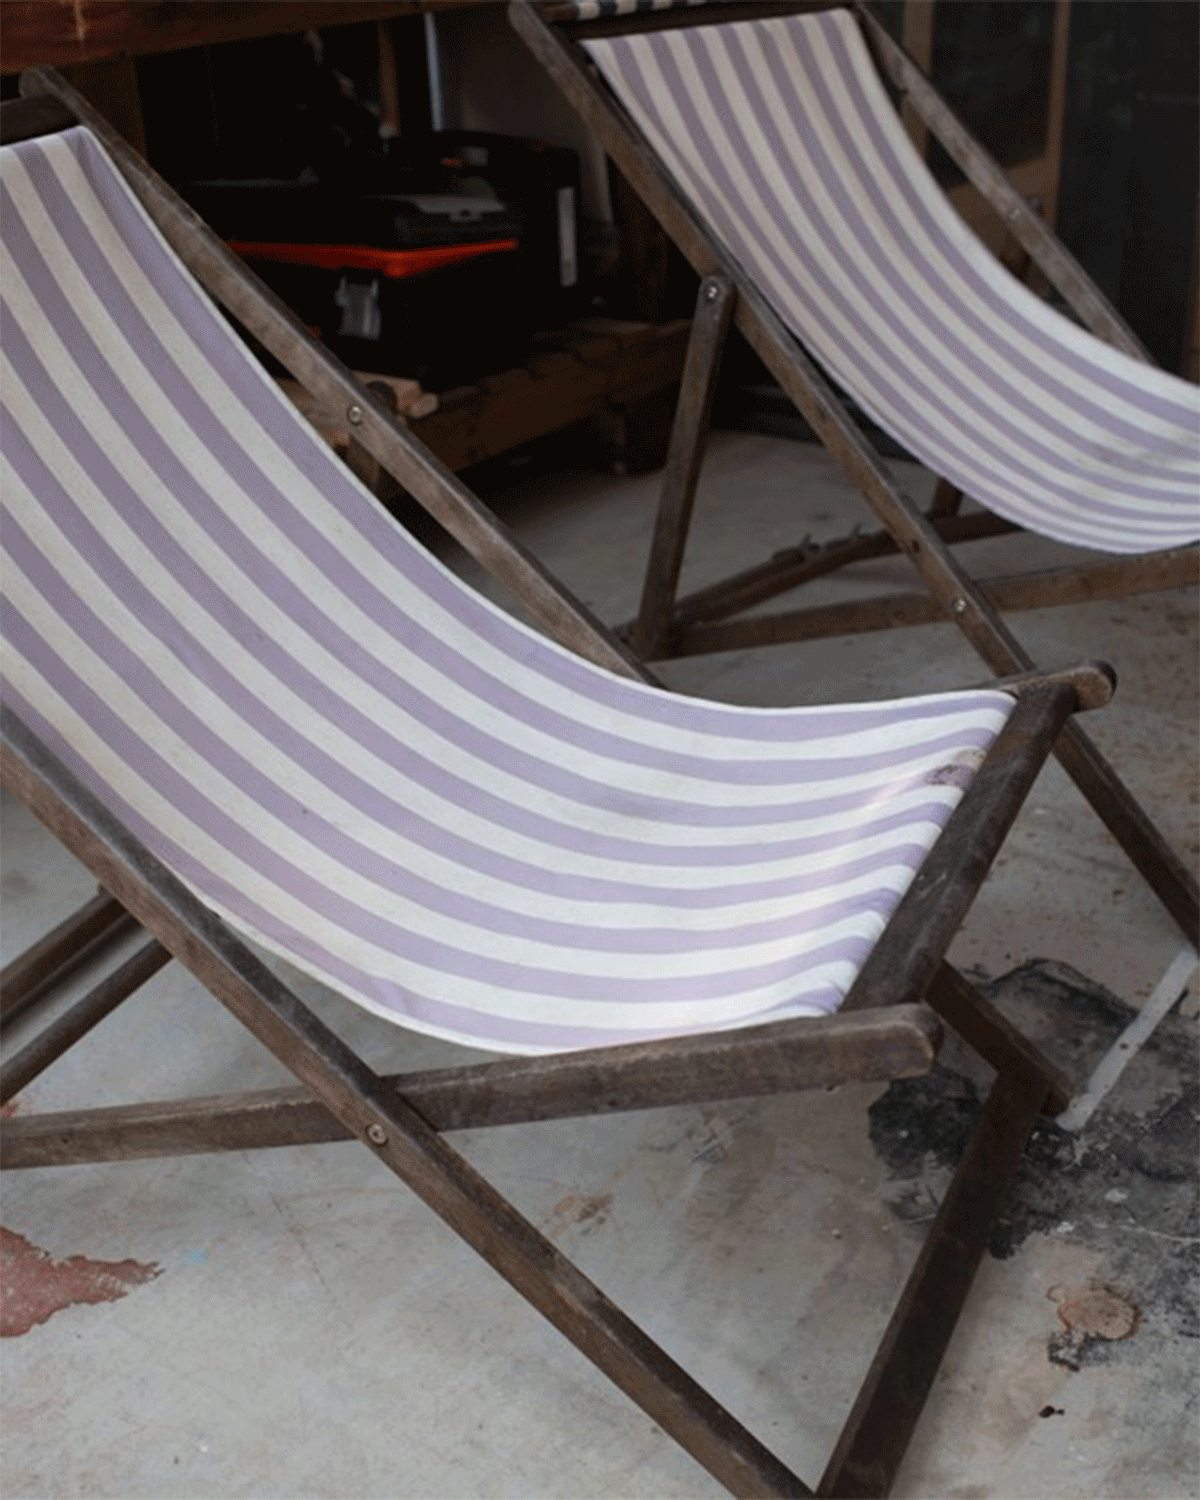 Preparing timber surface of outdoor chairs